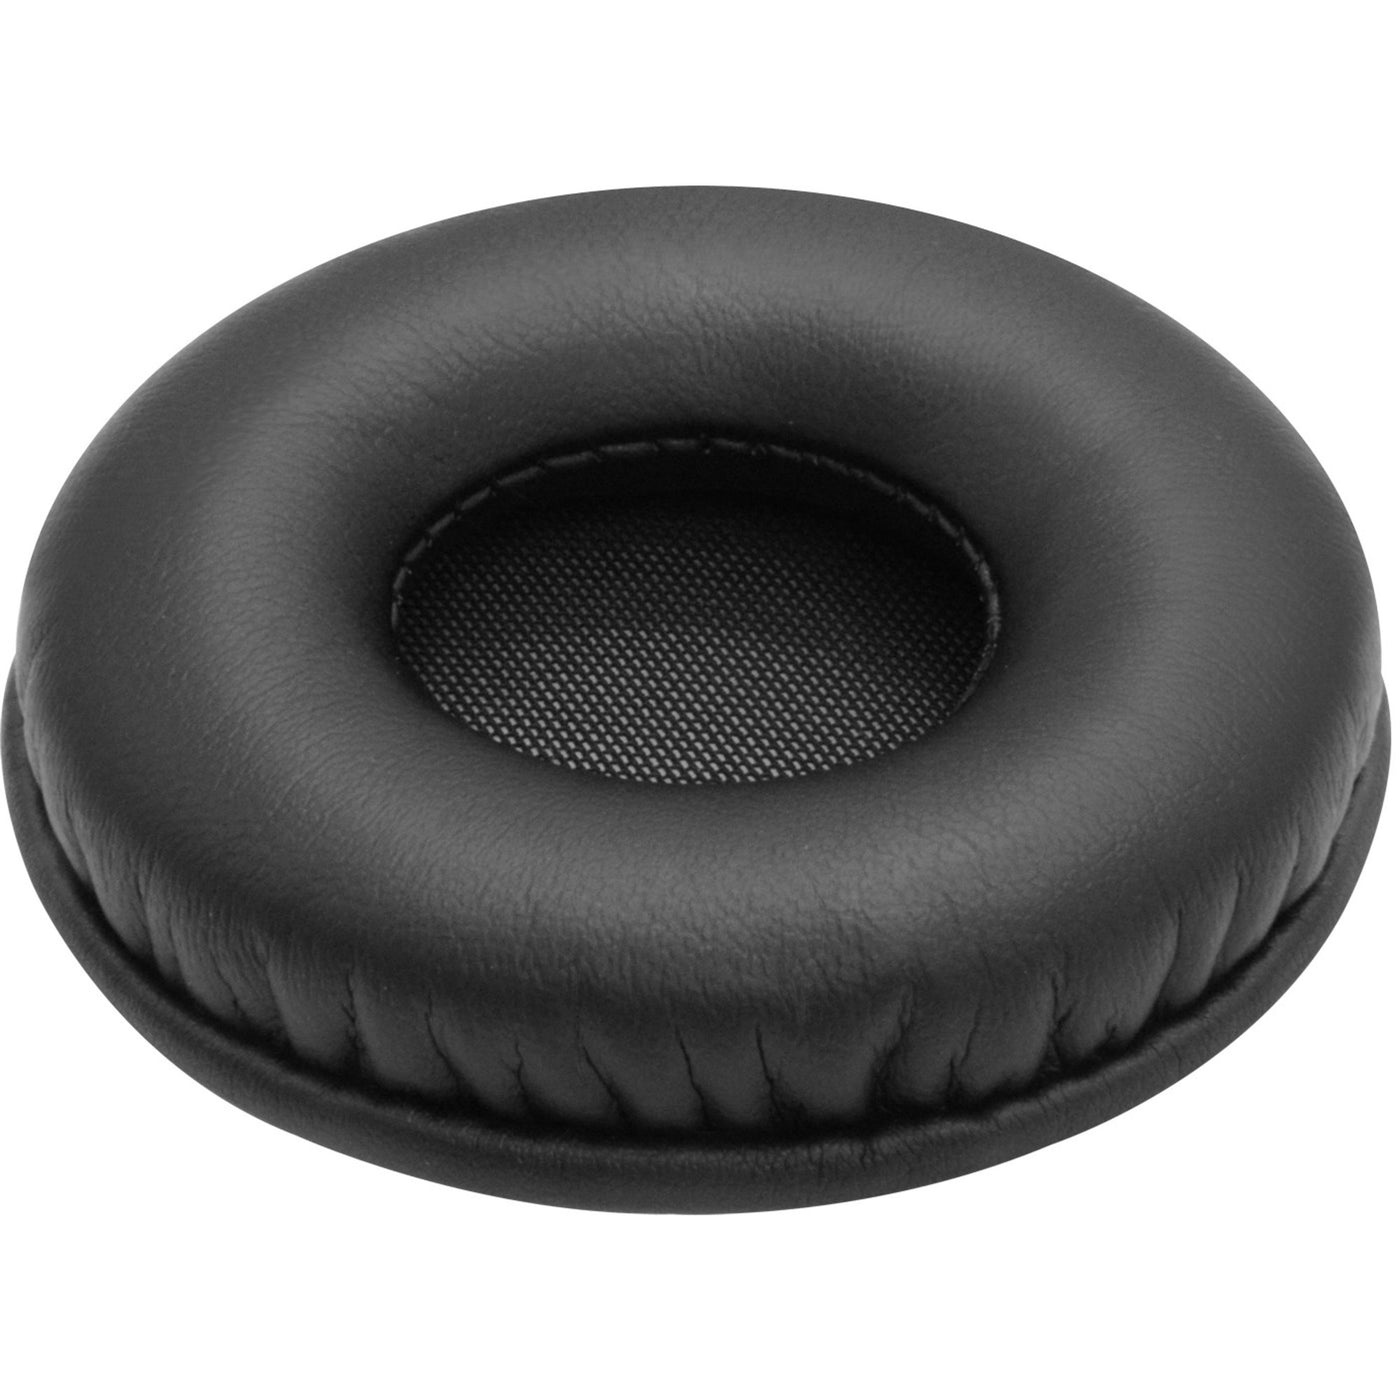 Pioneer DJ HC-EP0701-K Replacement Ear Pad for HDJ-S7-K On-Ear Studio Headphones, Professional Audio Equipment for Recording and DJ Booth, Black